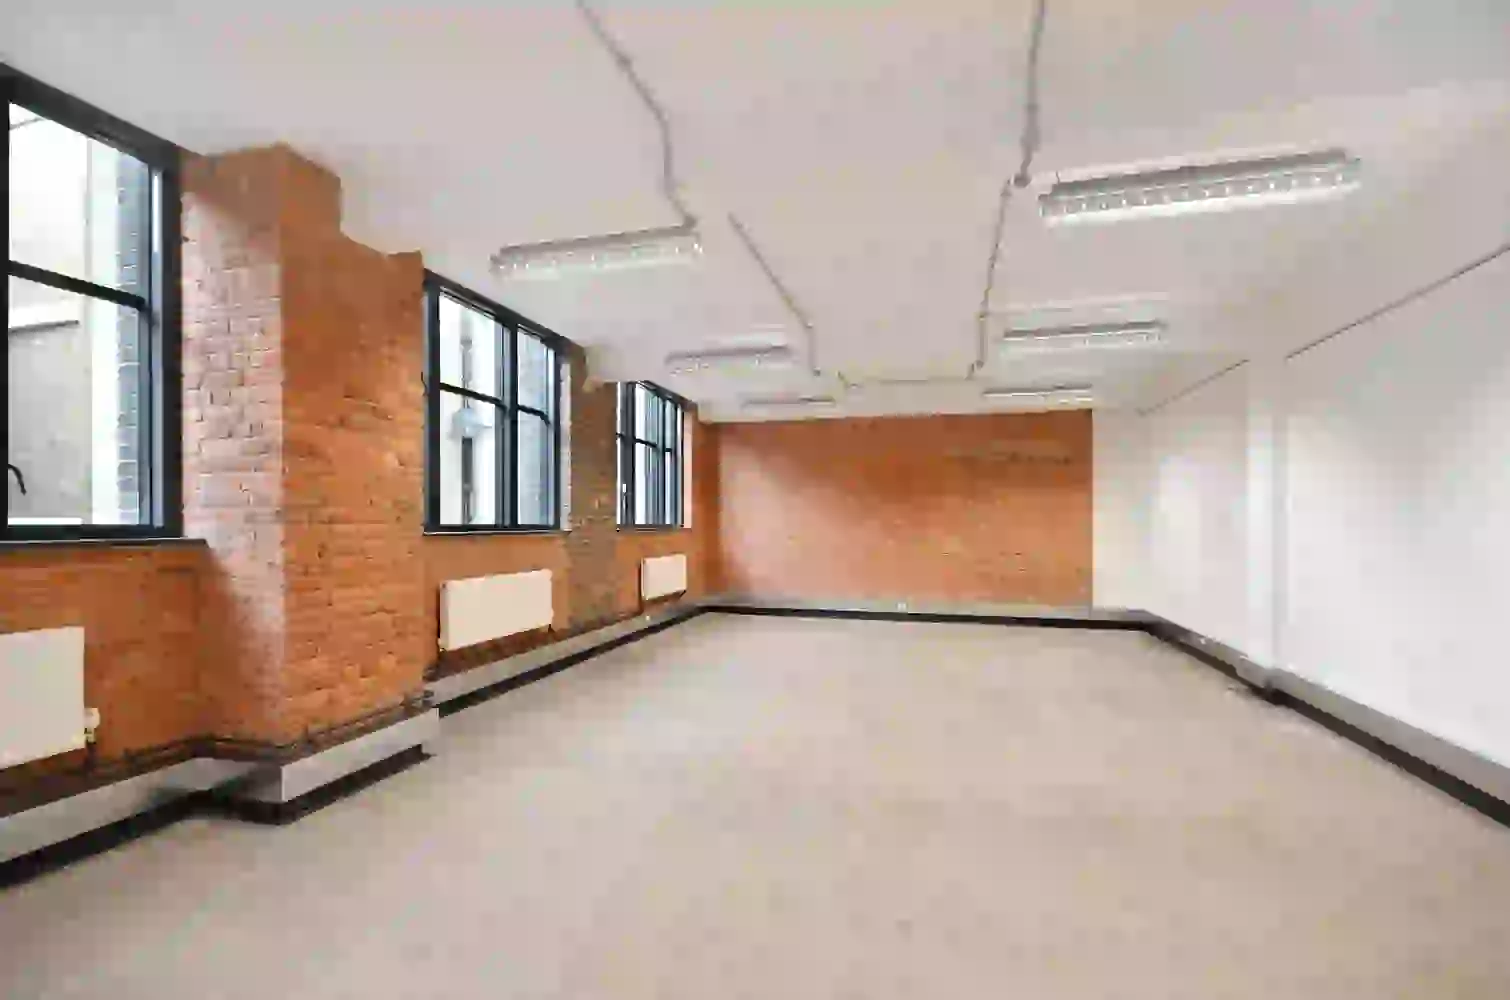 Office space to rent at Pill Box, 115 Coventry Road, Bethnal Green, London, unit PB.219, 569 sq ft (52 sq m).